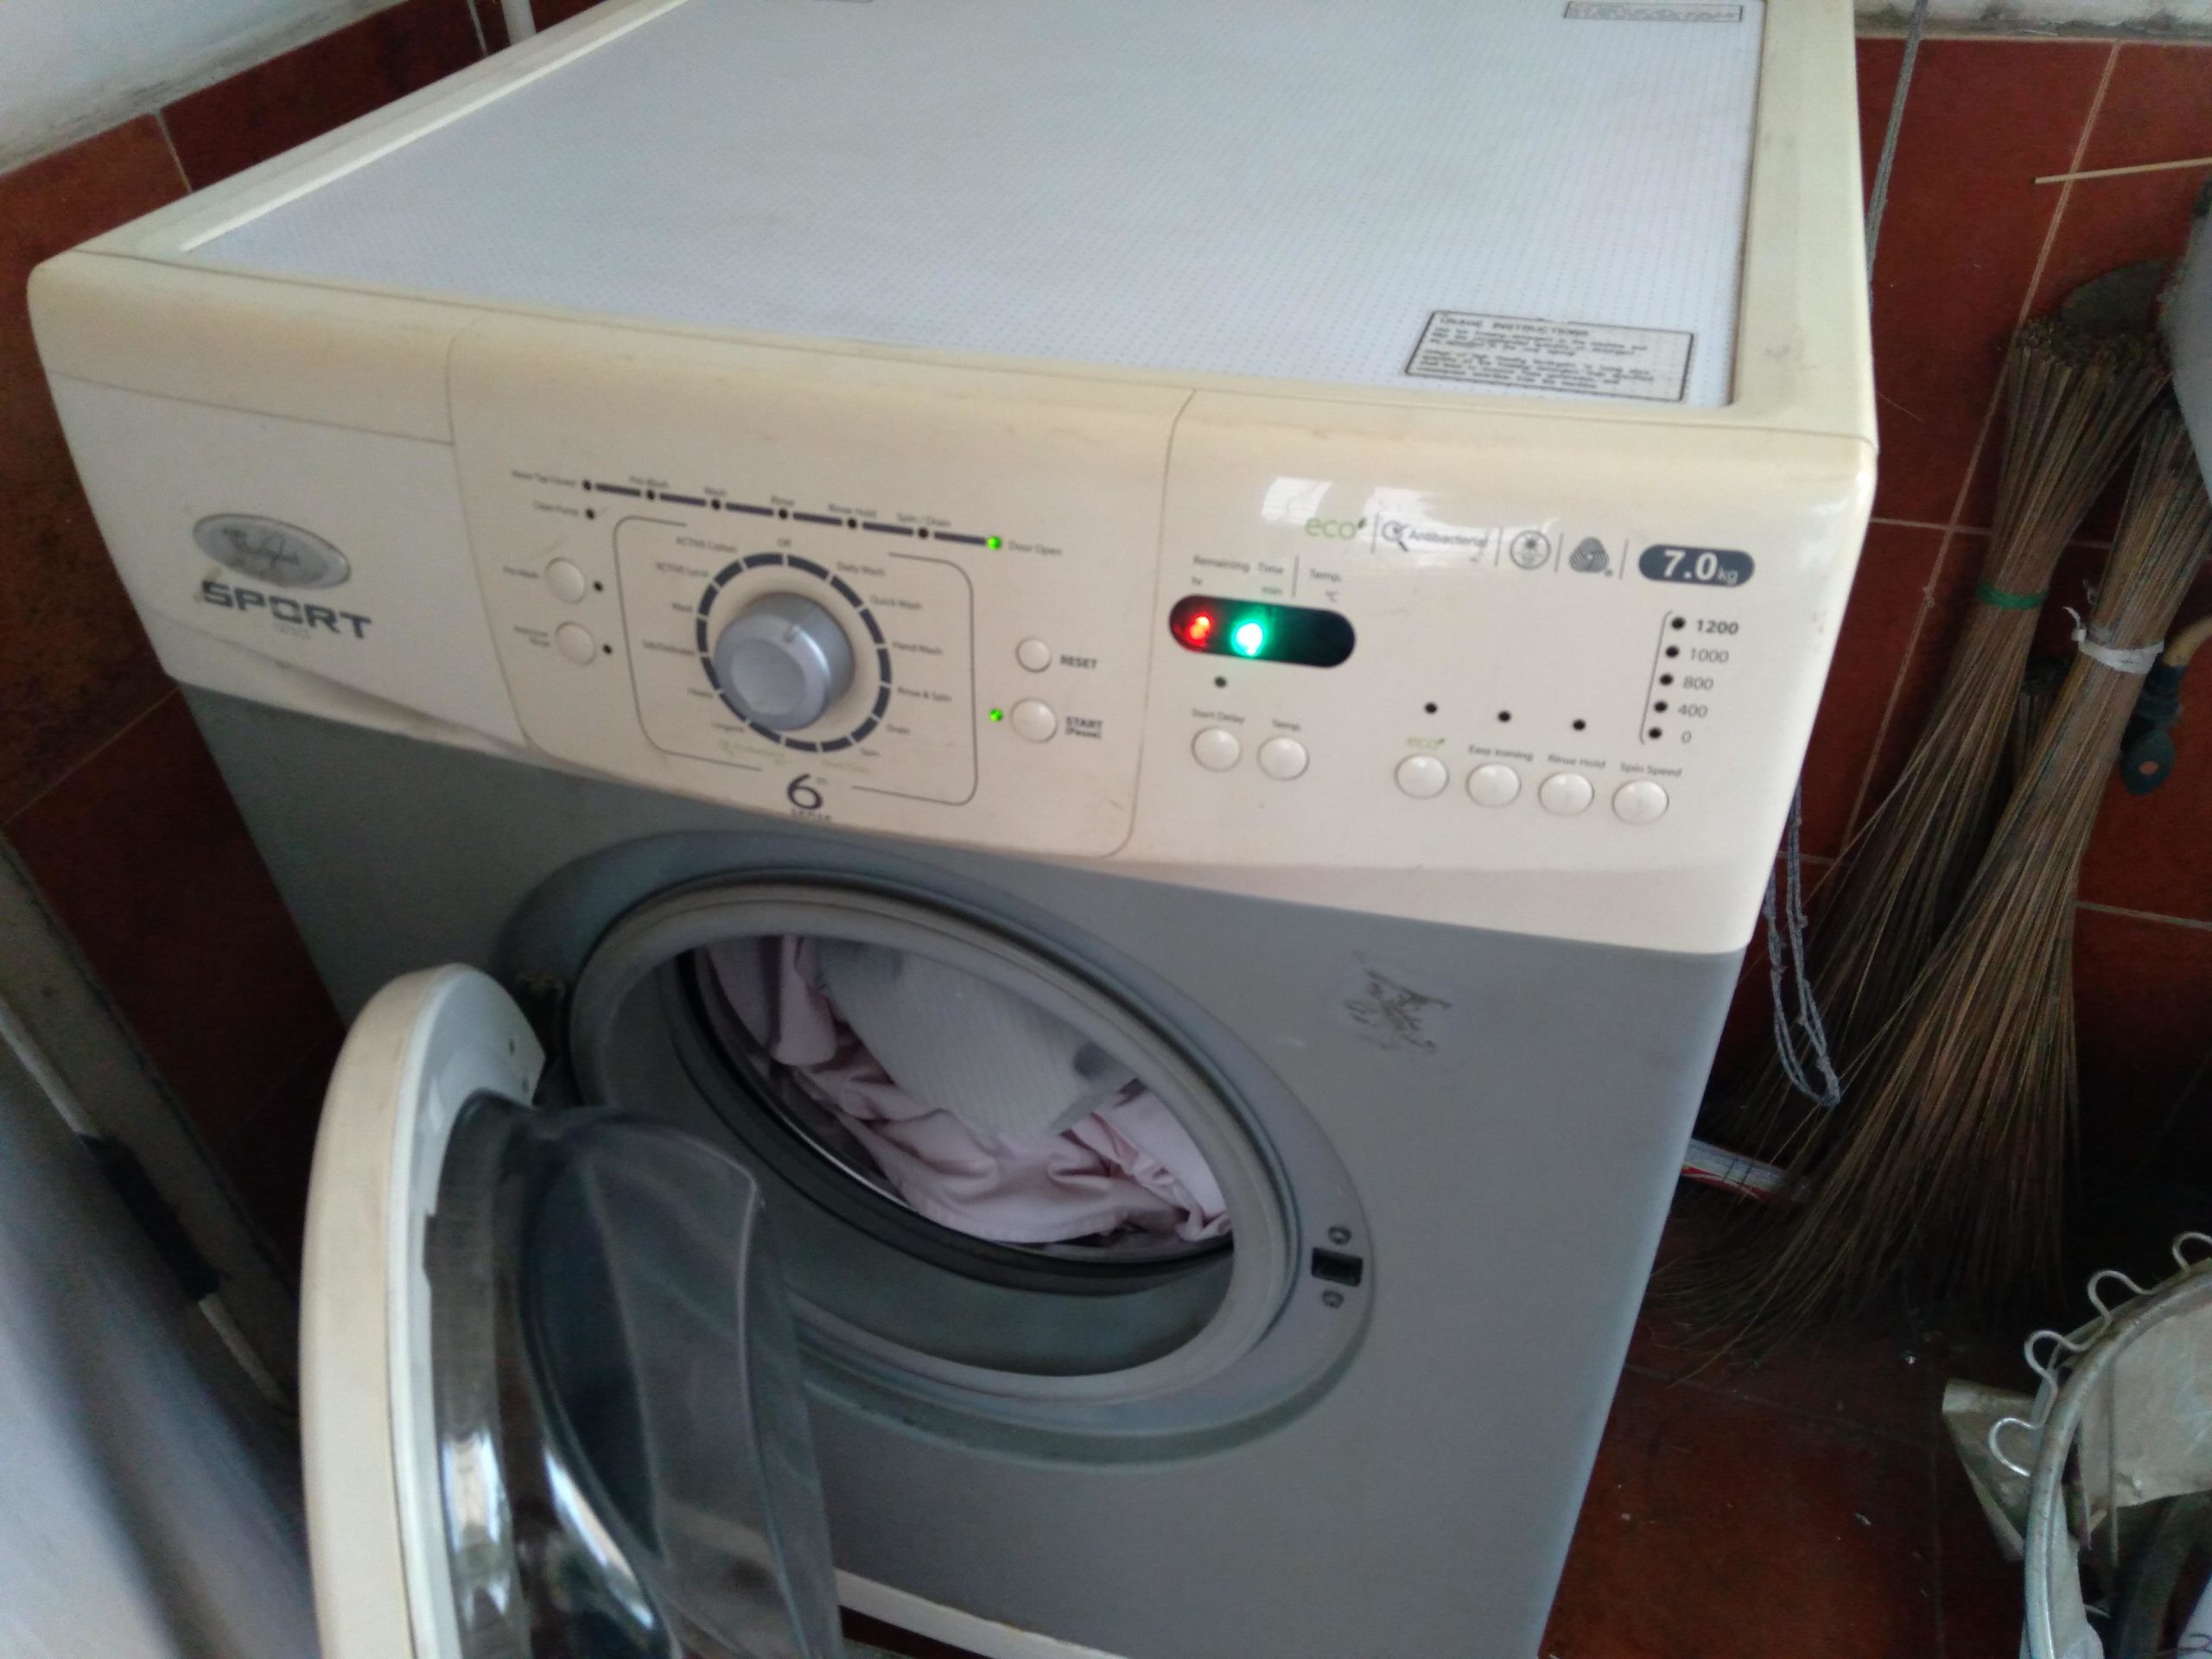 Arduino resurrects a washing machine that failed for silly reasons